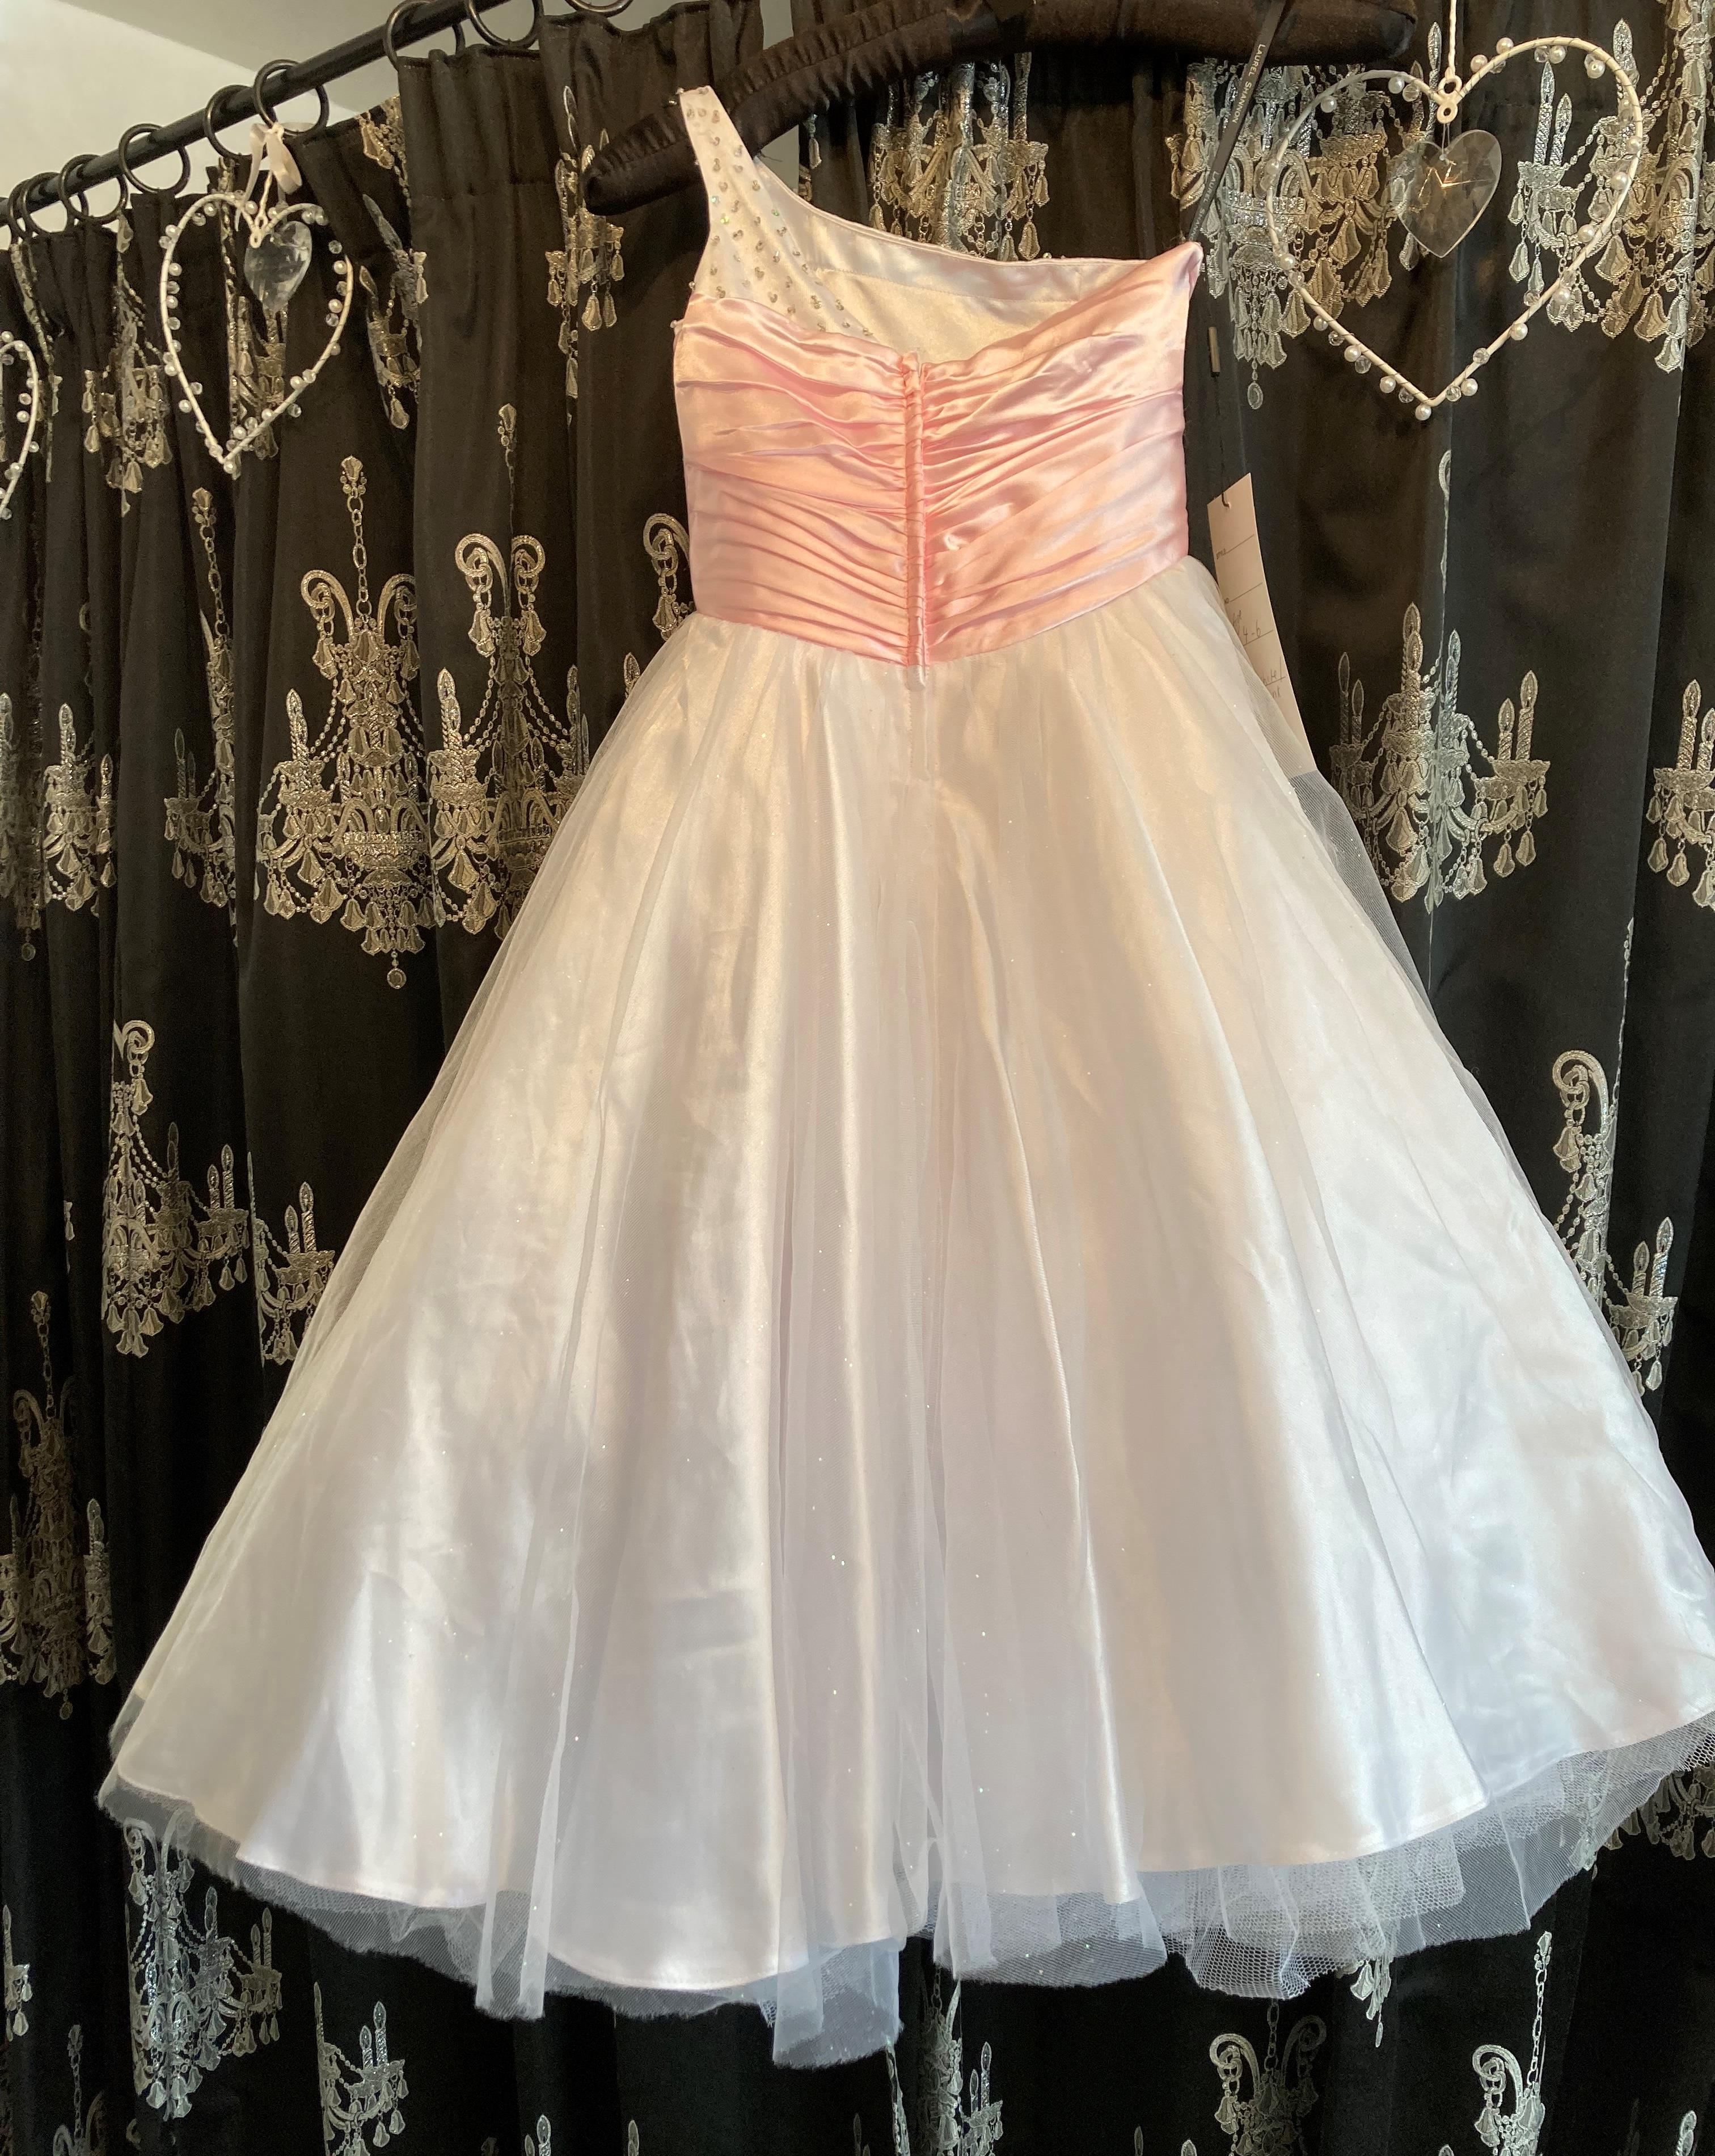 Children's white/pink pageant gown, age 4-6. - Image 4 of 4